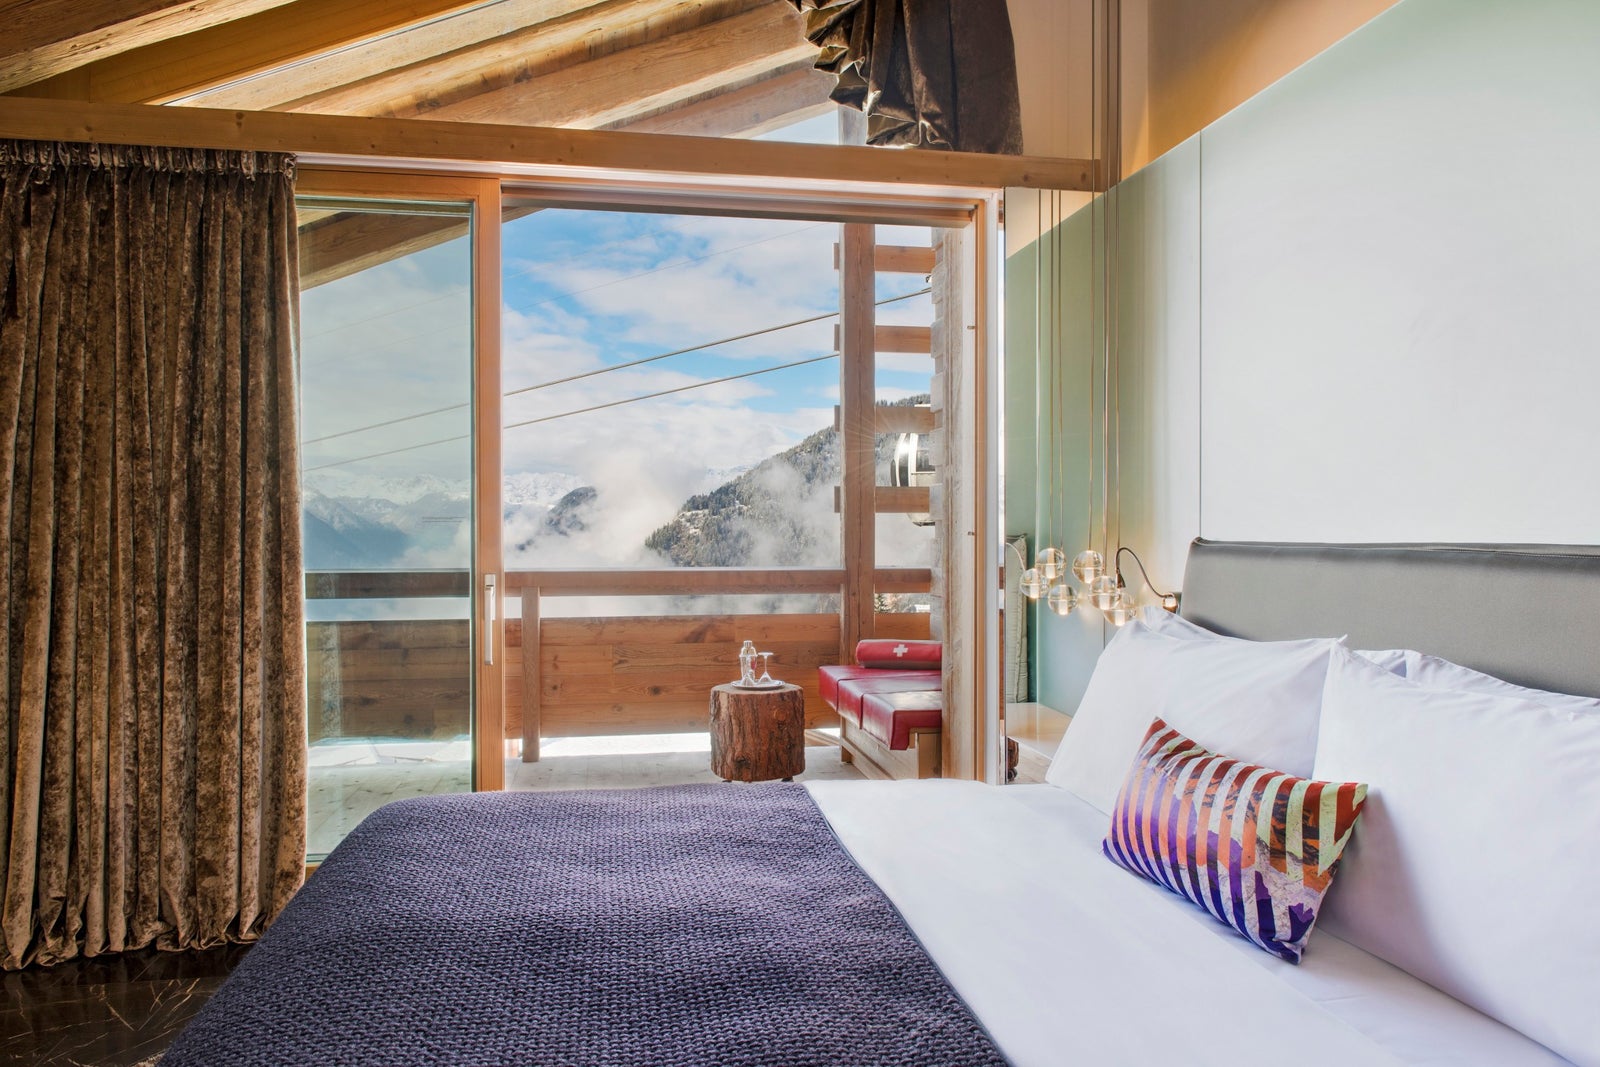 11 of the most effective factors lodges in Europe for a snowy winter vacation